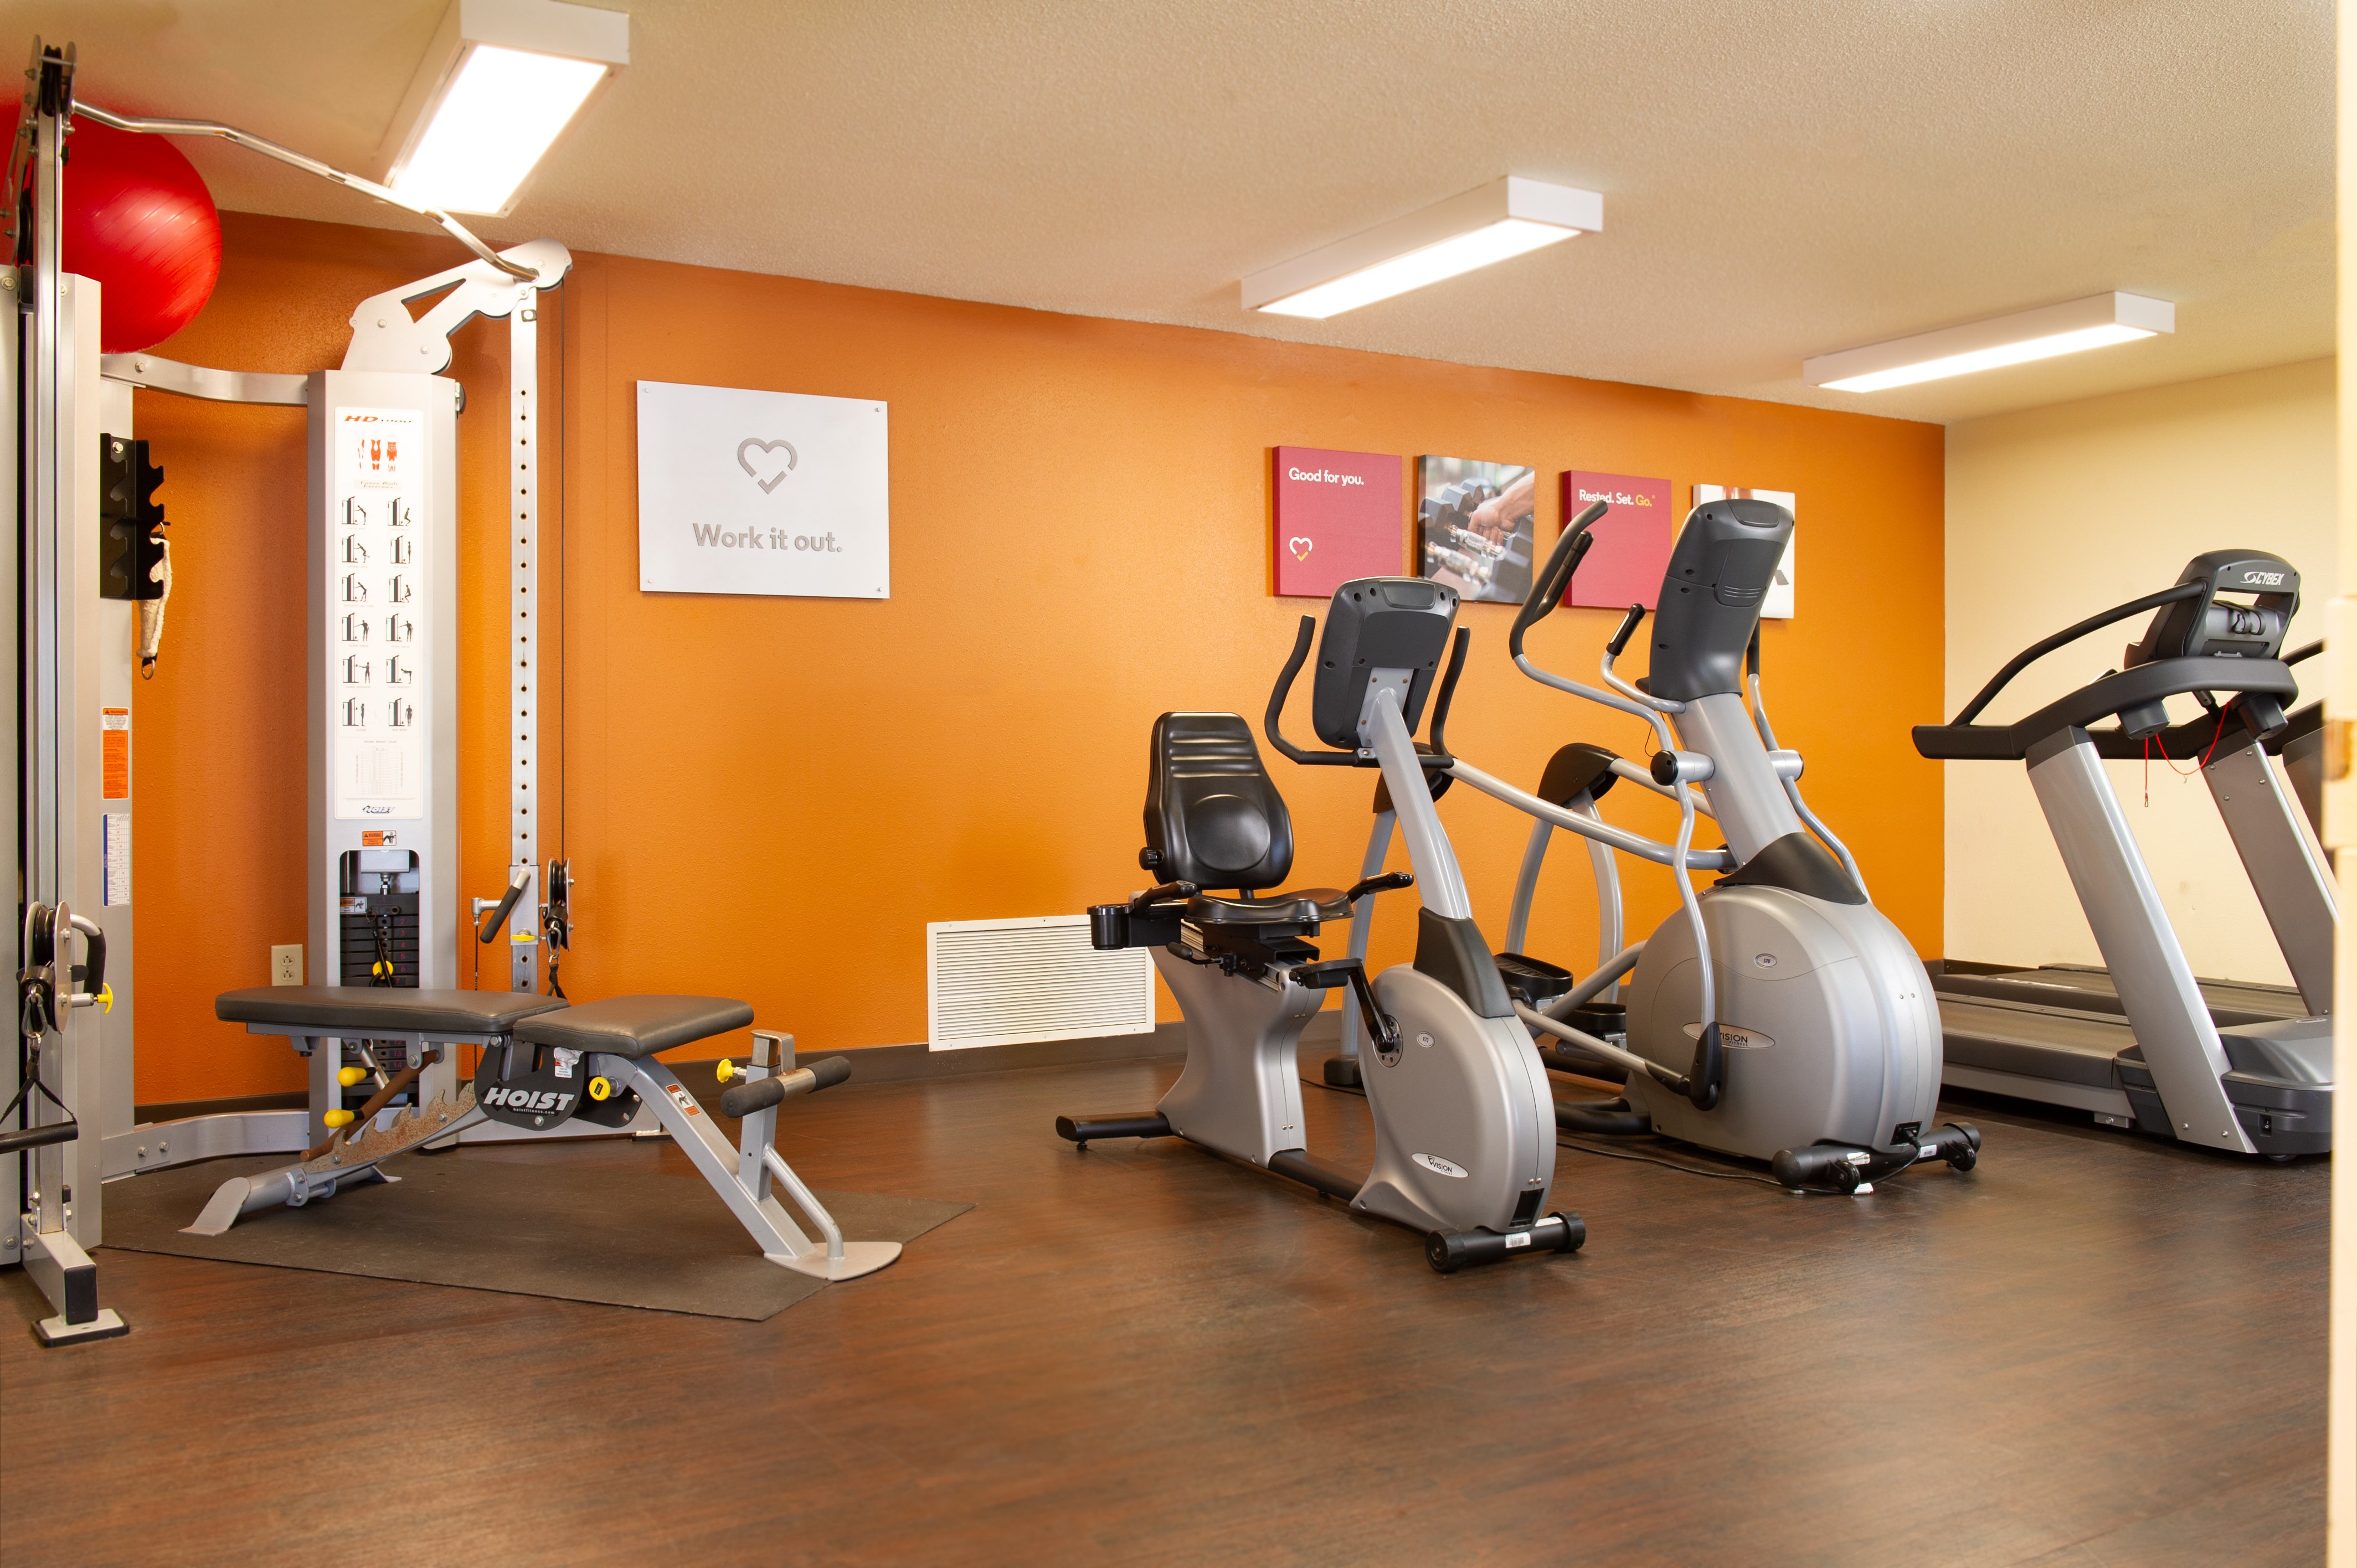 Utilize cardio equipment and weight machines in the hotel gym